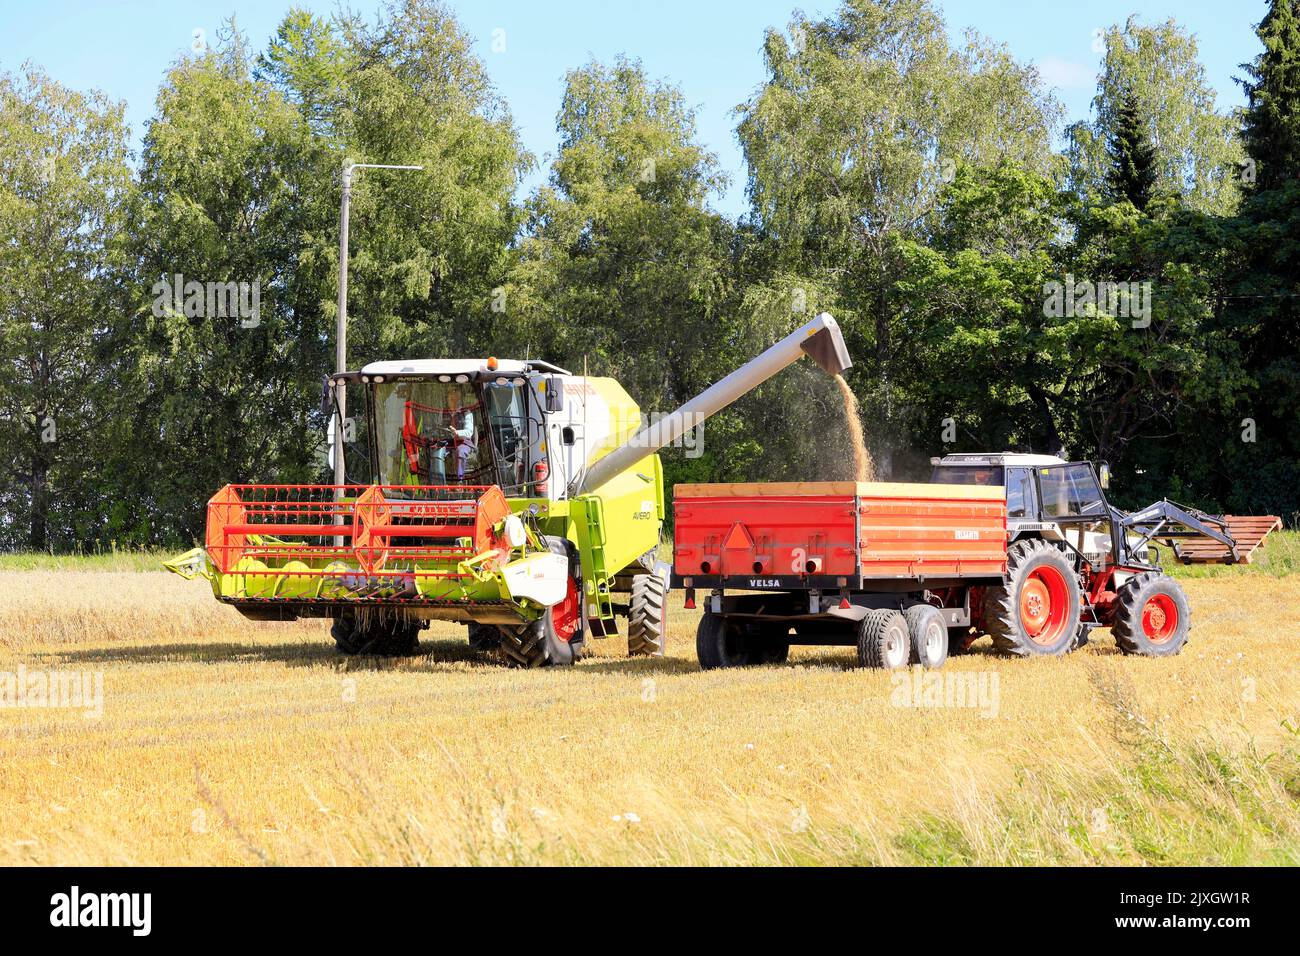 Claas Avero combine harvester unloads harvested oat onto agricultural trailer behind David Brown/Case 1690 tractor. Salo, Finland. August 27, 2022. Stock Photo